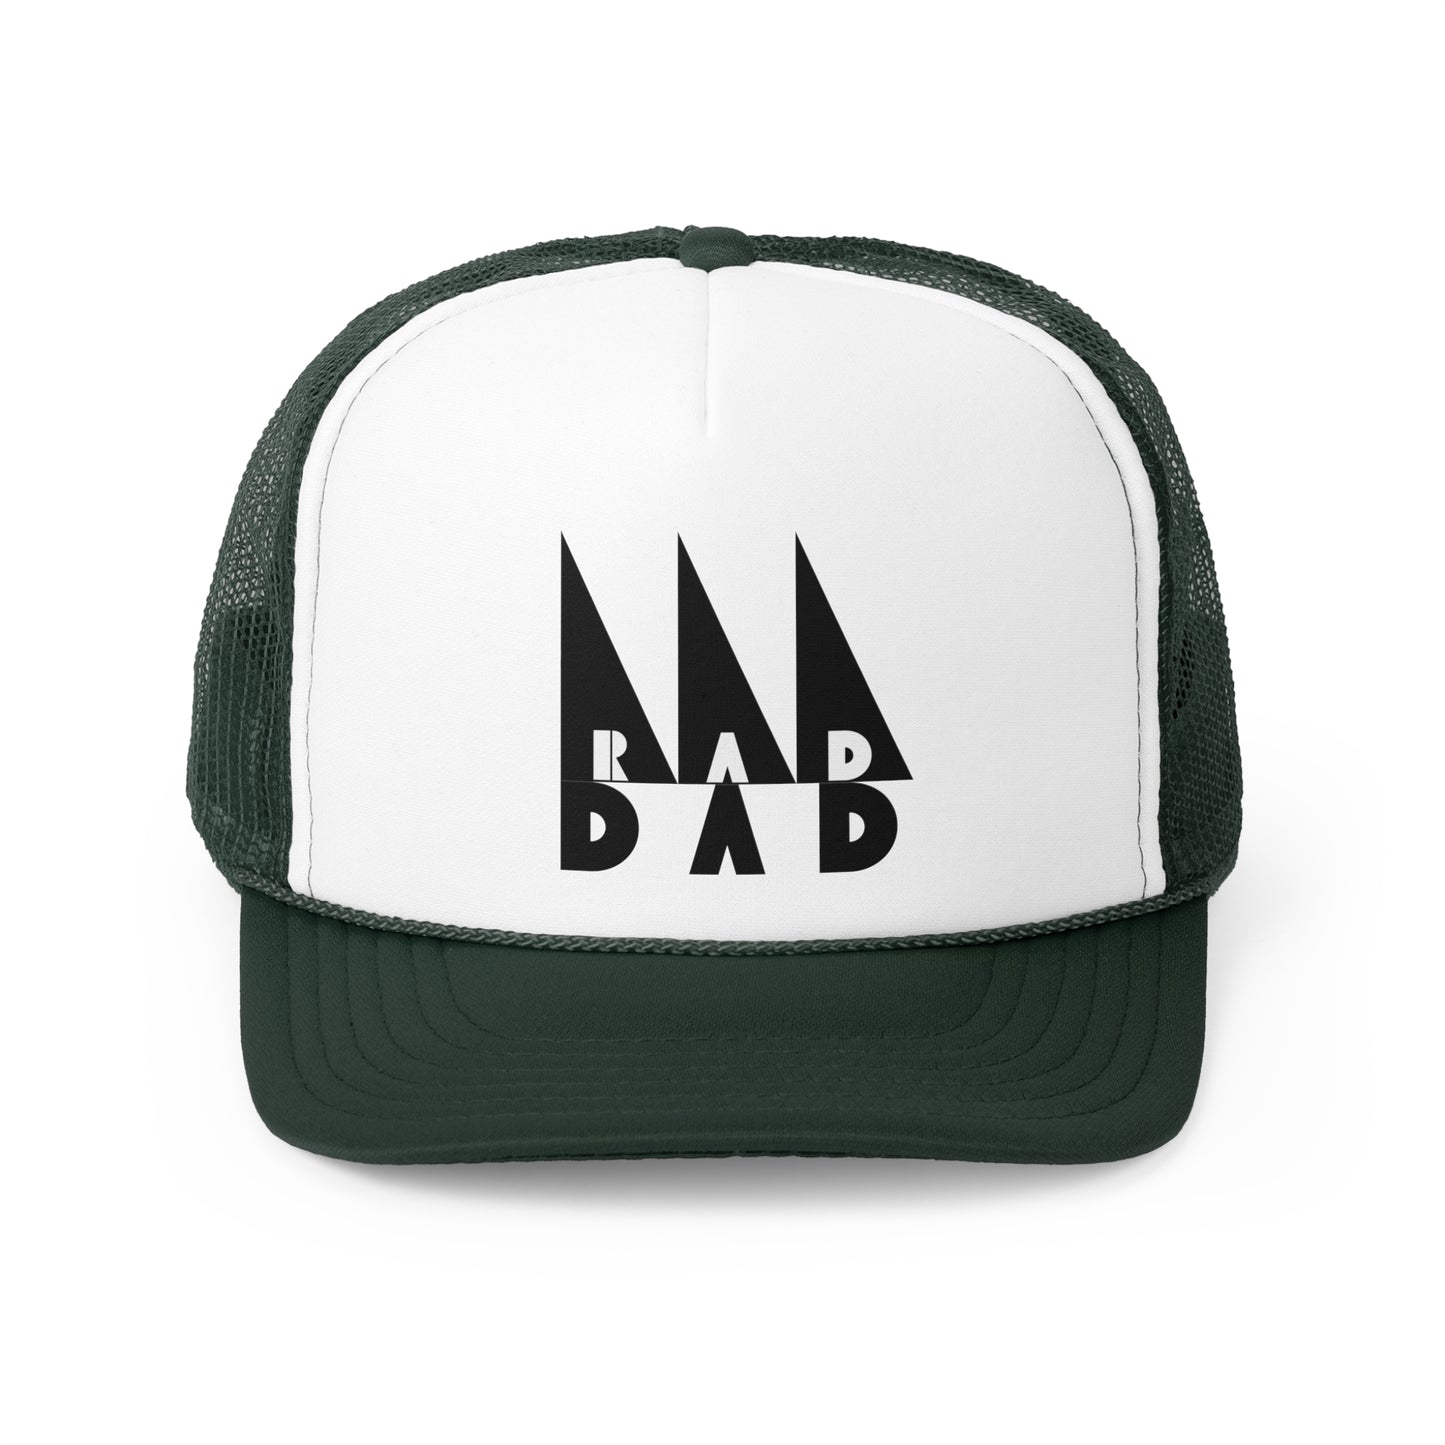 Rad Dad Abstract Trucker Hat Father's Day Gift Minimalist Modern Ball Cap for Dad Snapback Bauhaus Summer Hat Gift for Dad Retro Vibe